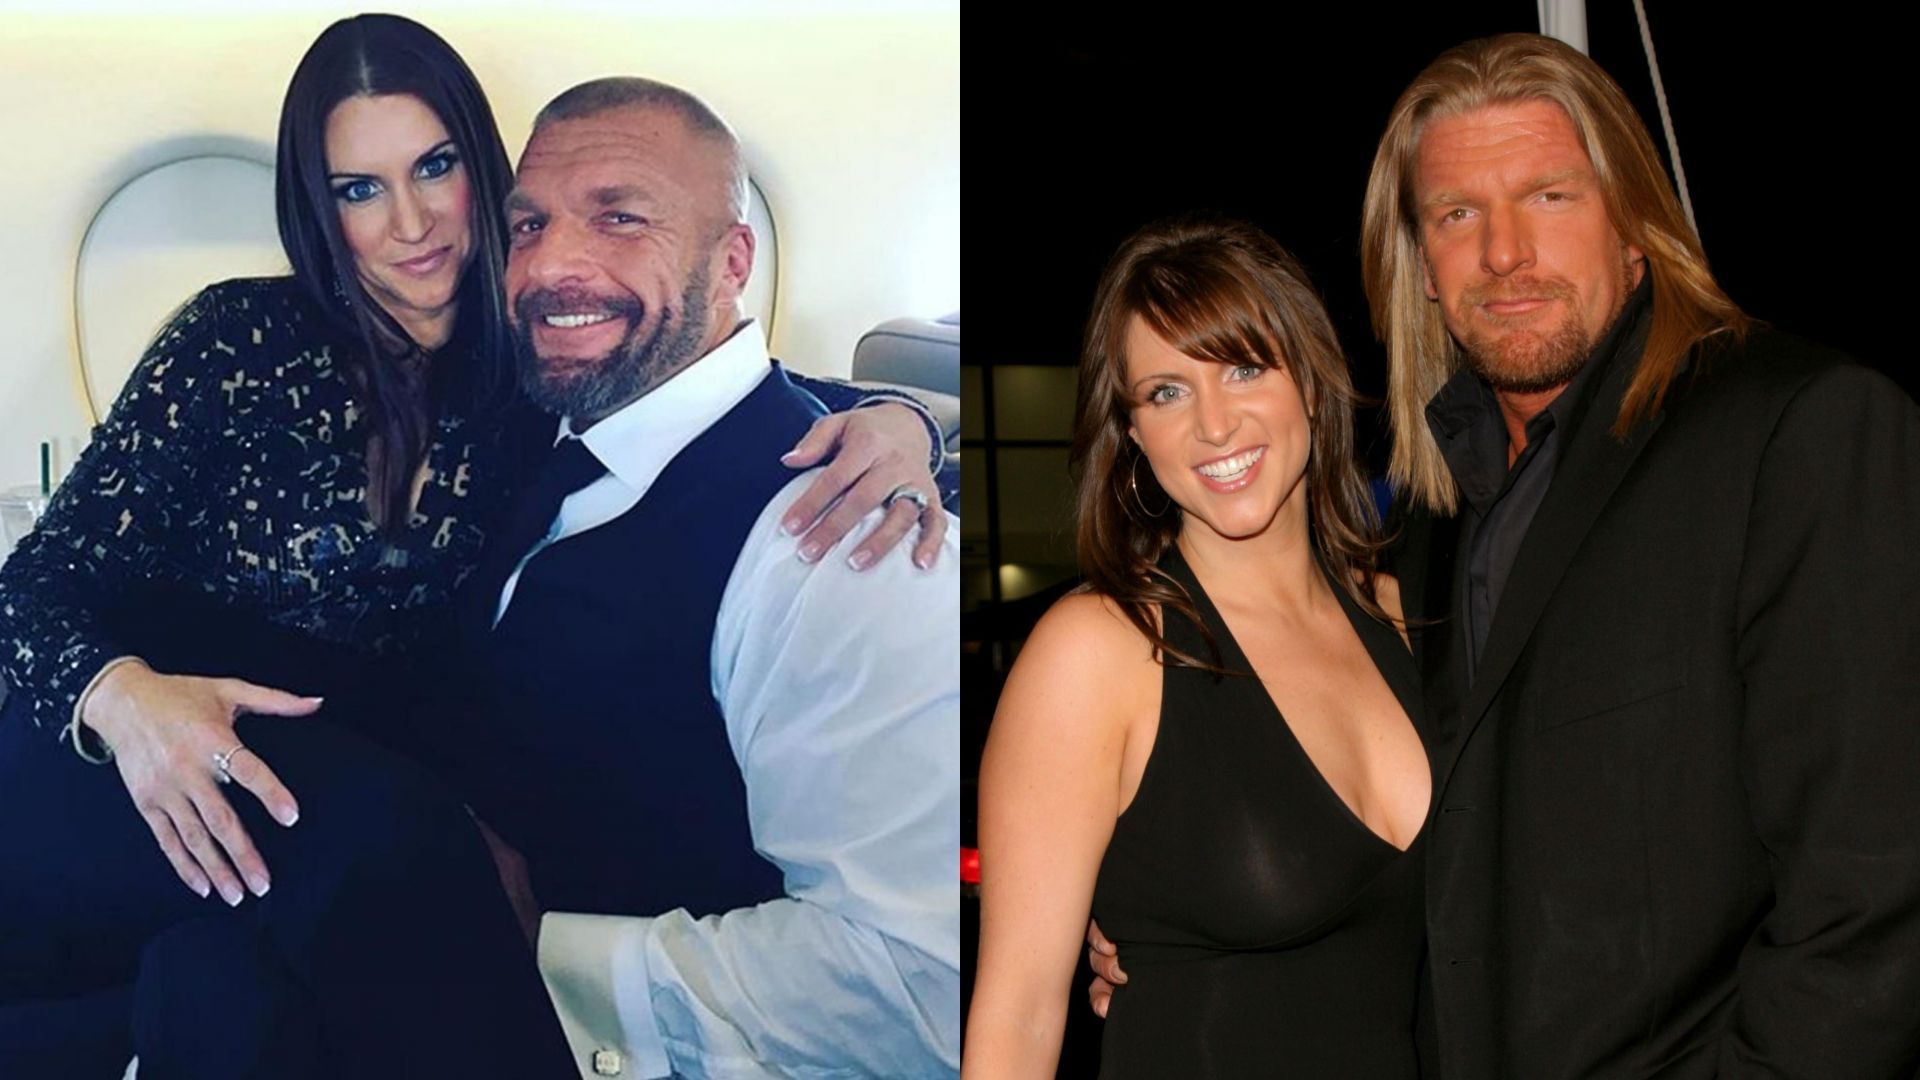 Stephanie McMahon is not with Triple H for who he is